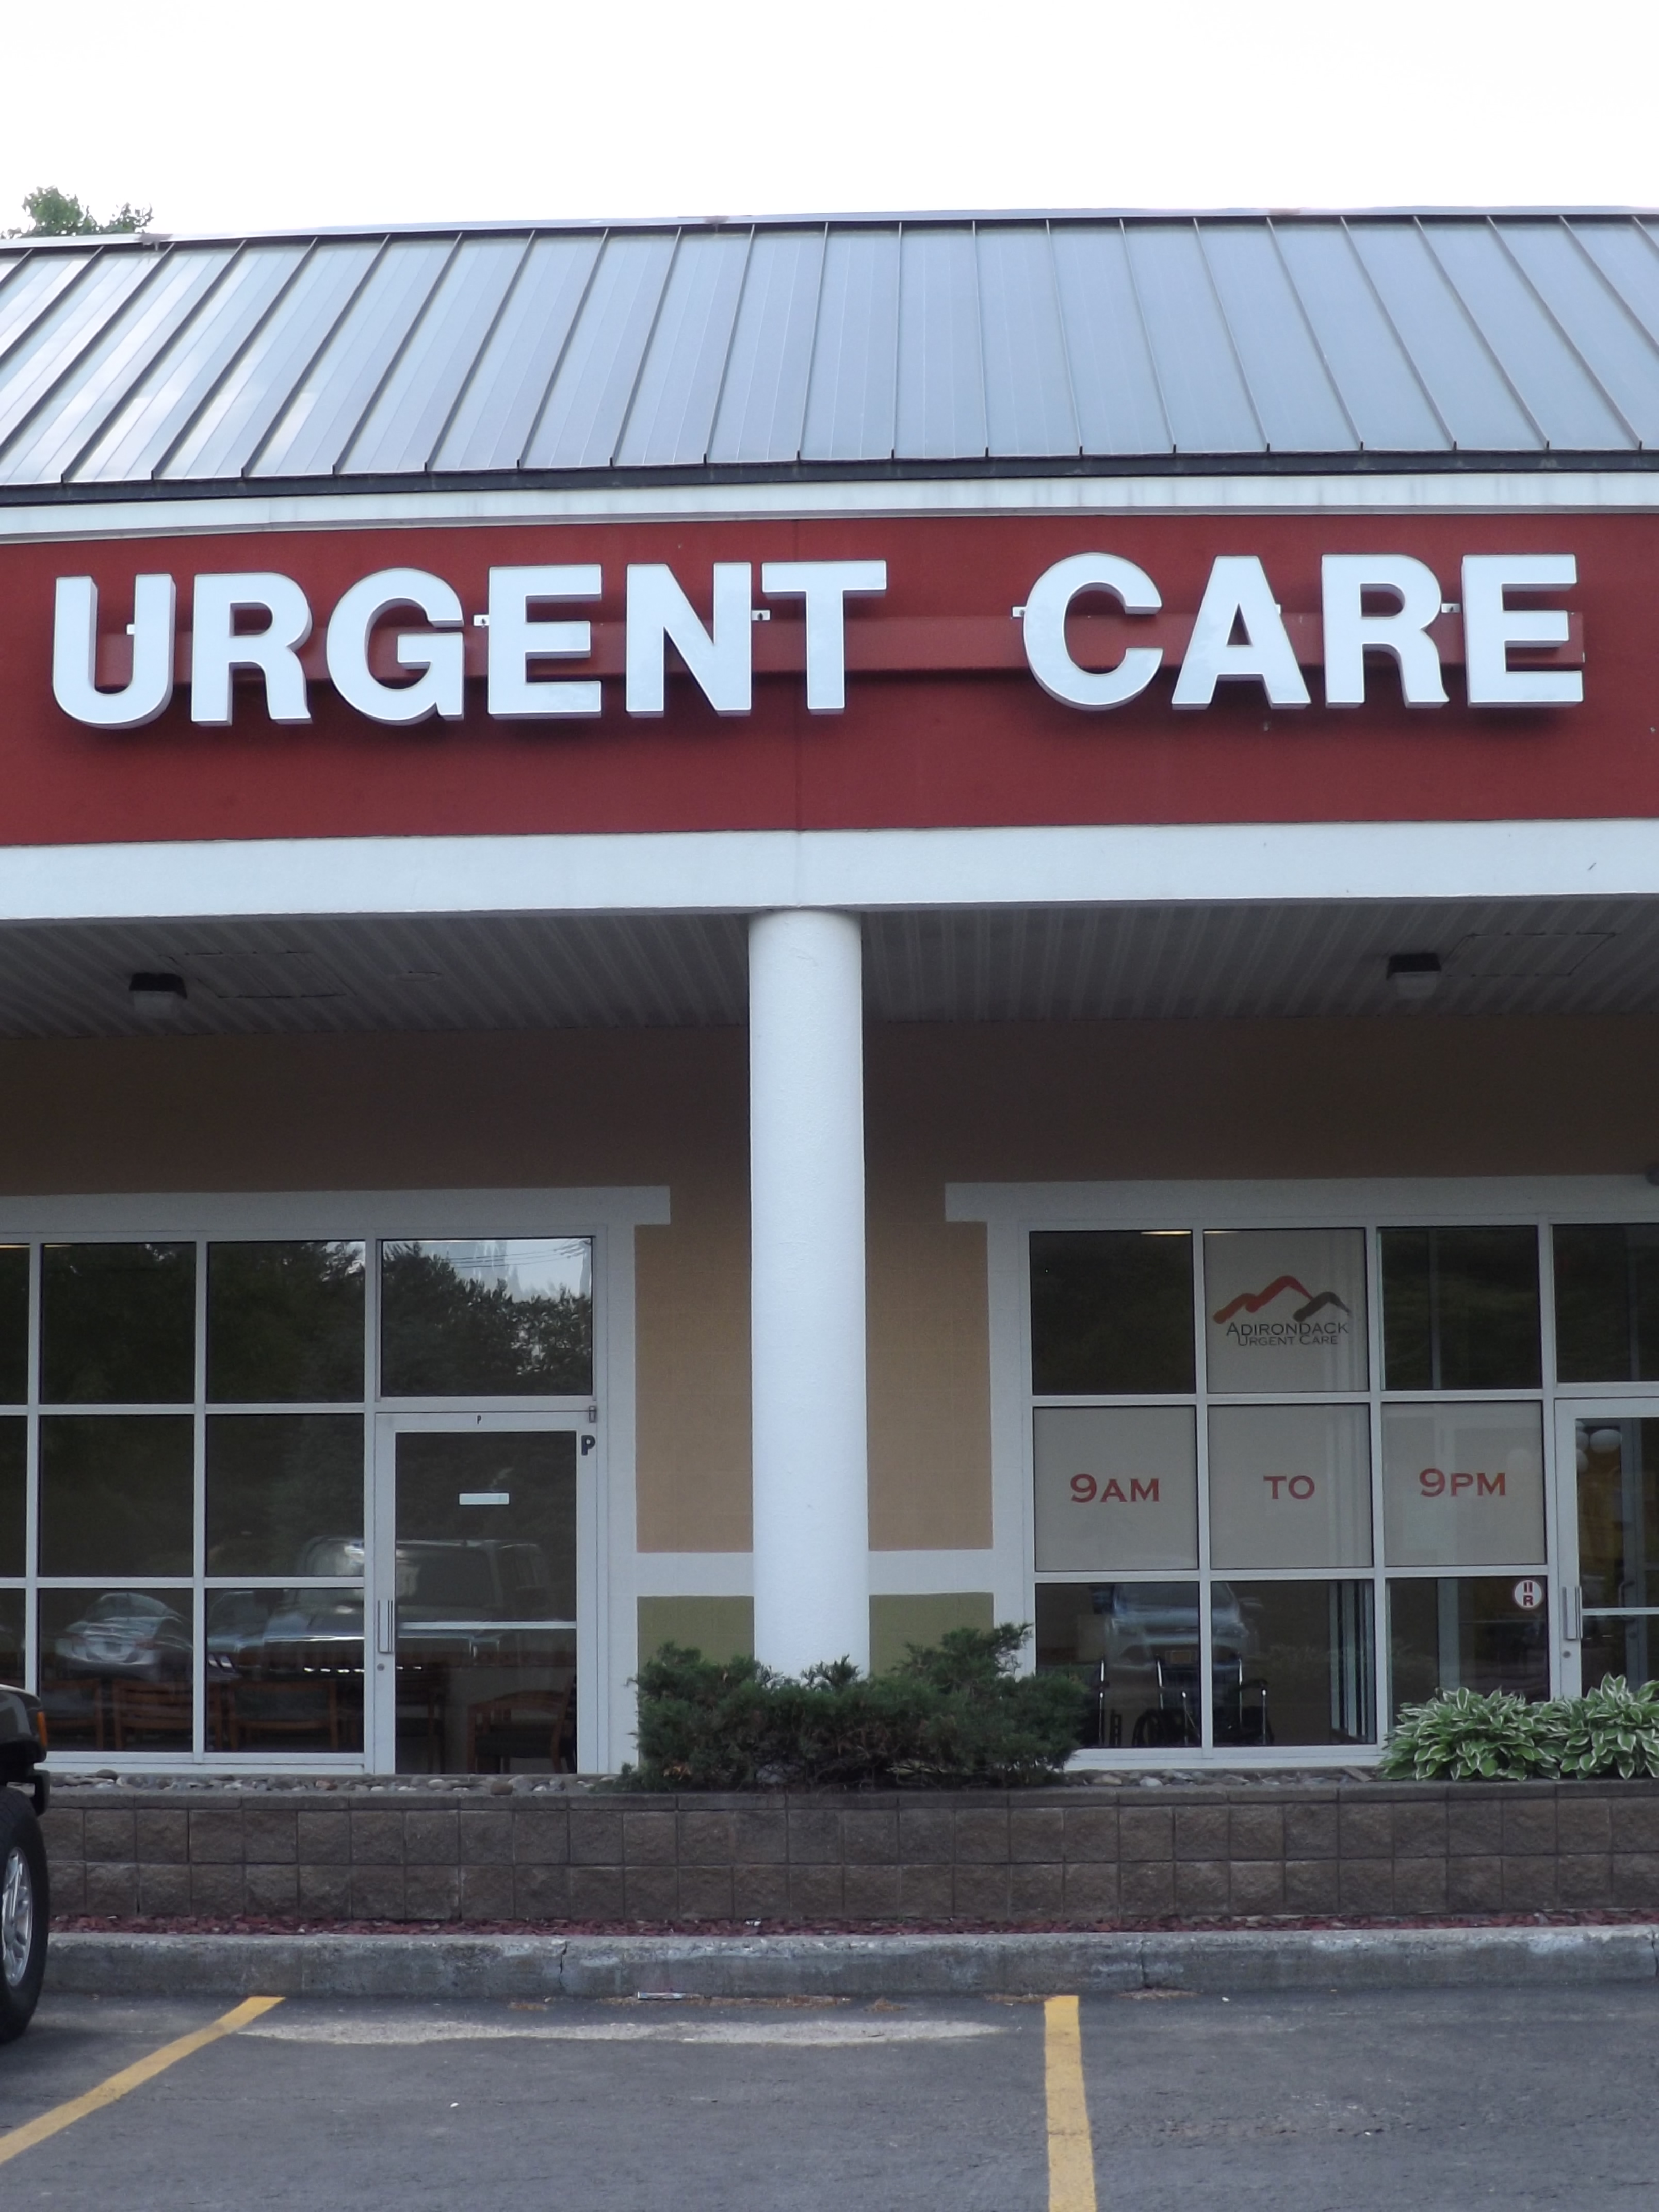 Adirondack Urgent Care In Queensbury Offers Services 12 Hours A Day